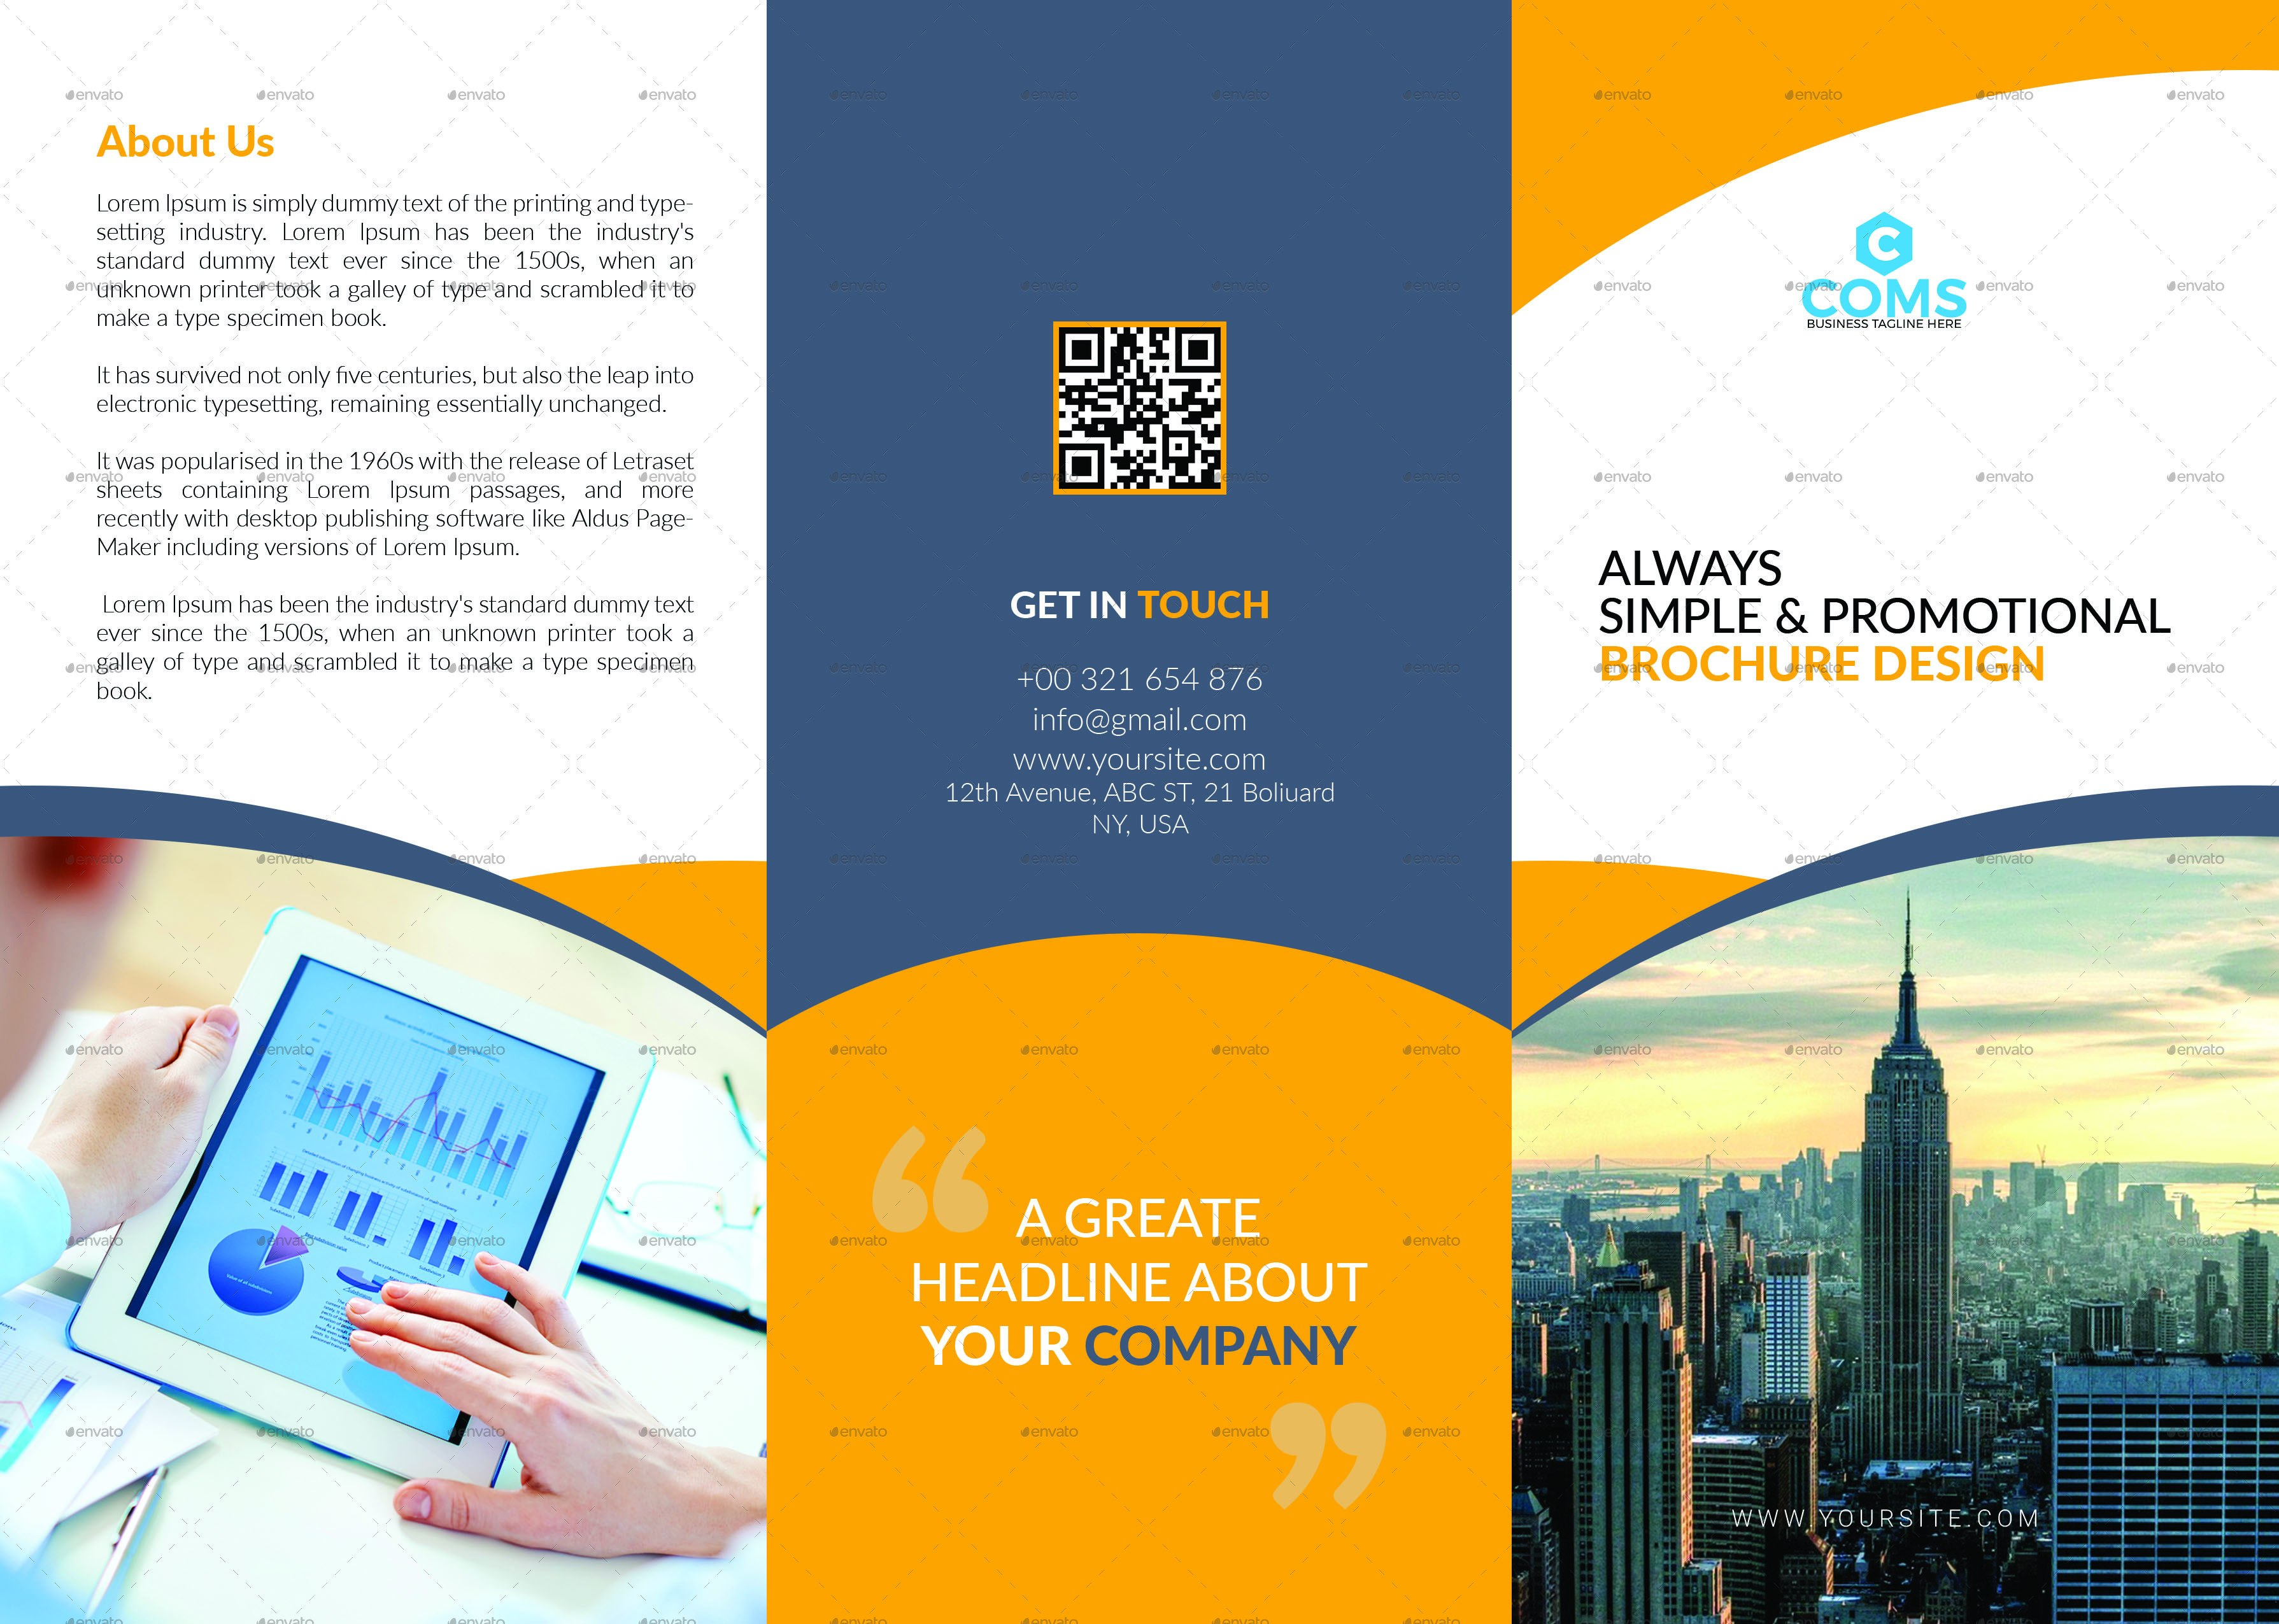 Premium  Free Business Brochure Templates Psd To Download within Single Page Brochure Templates Psd